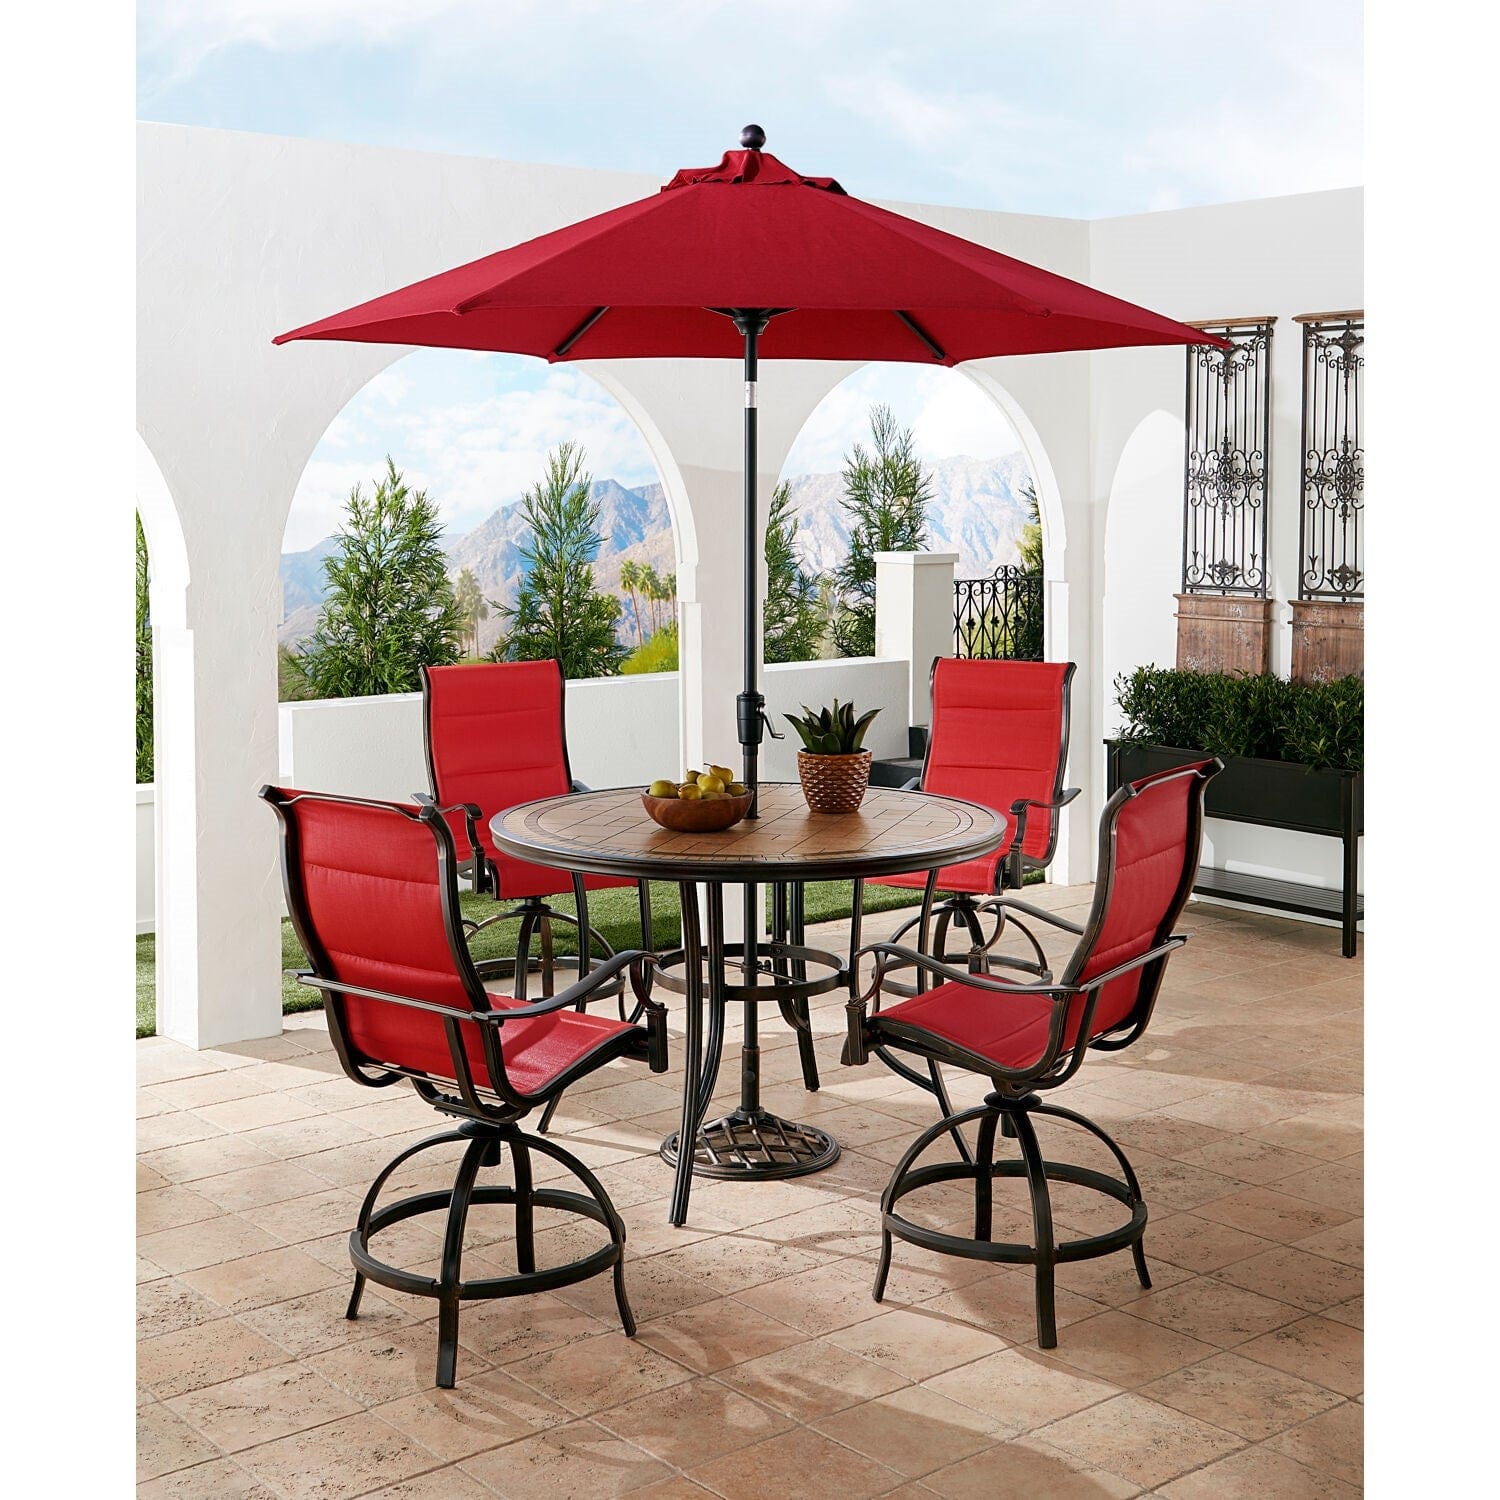 Hanover Outdoor Dining Set Hanover Monaco 5-Piece High-Dining Set in Red with 4 Padded Counter-Height Swivel Chairs, 56-In. Tile-Top Table and 9-Ft. Umbrella | MONDN5PCPDBRC-SU-R